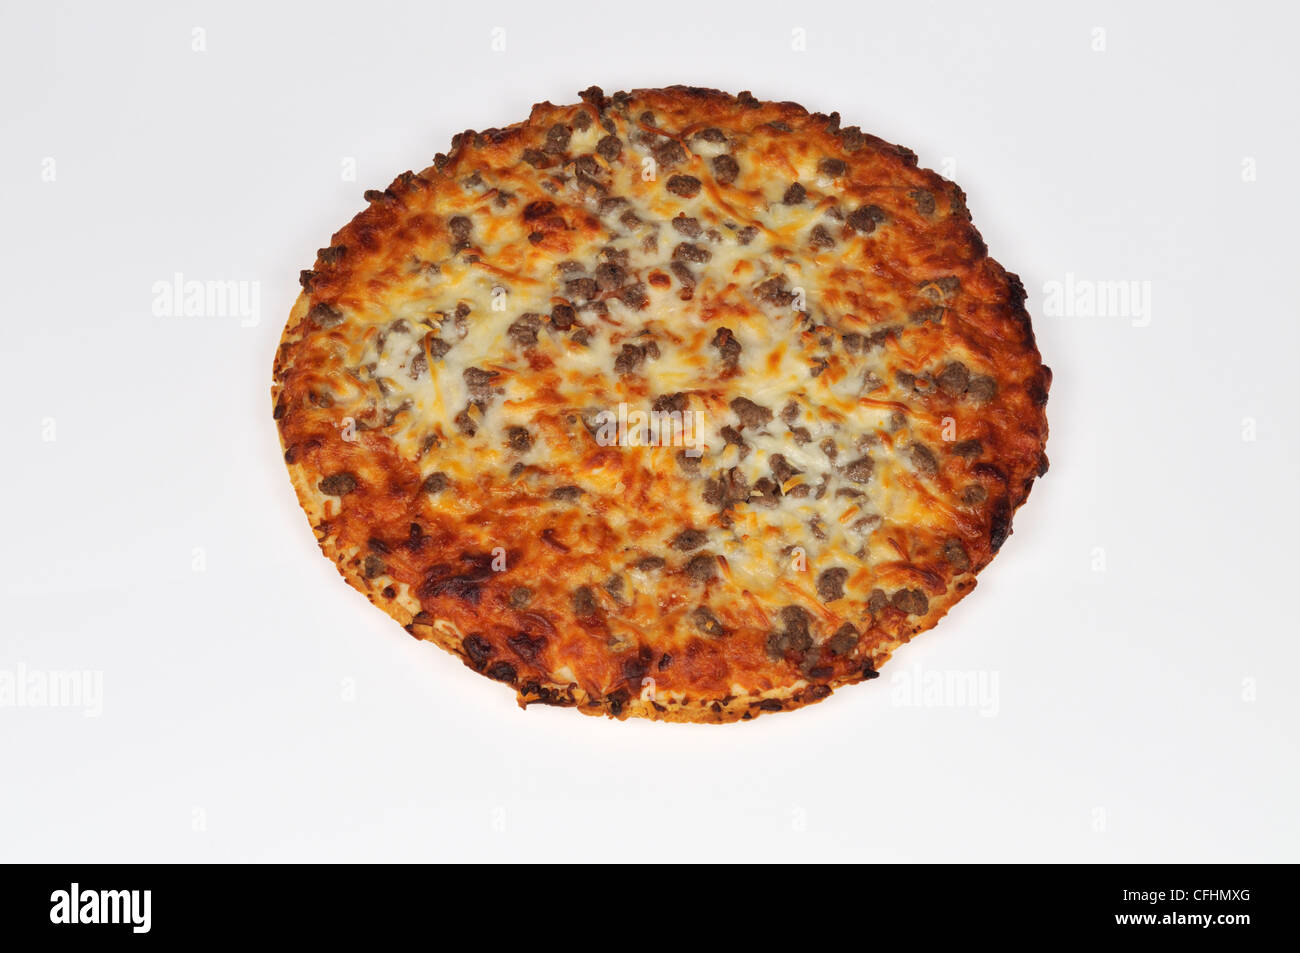 Meatball pizza with cheese and tomato sauce Stock Photo